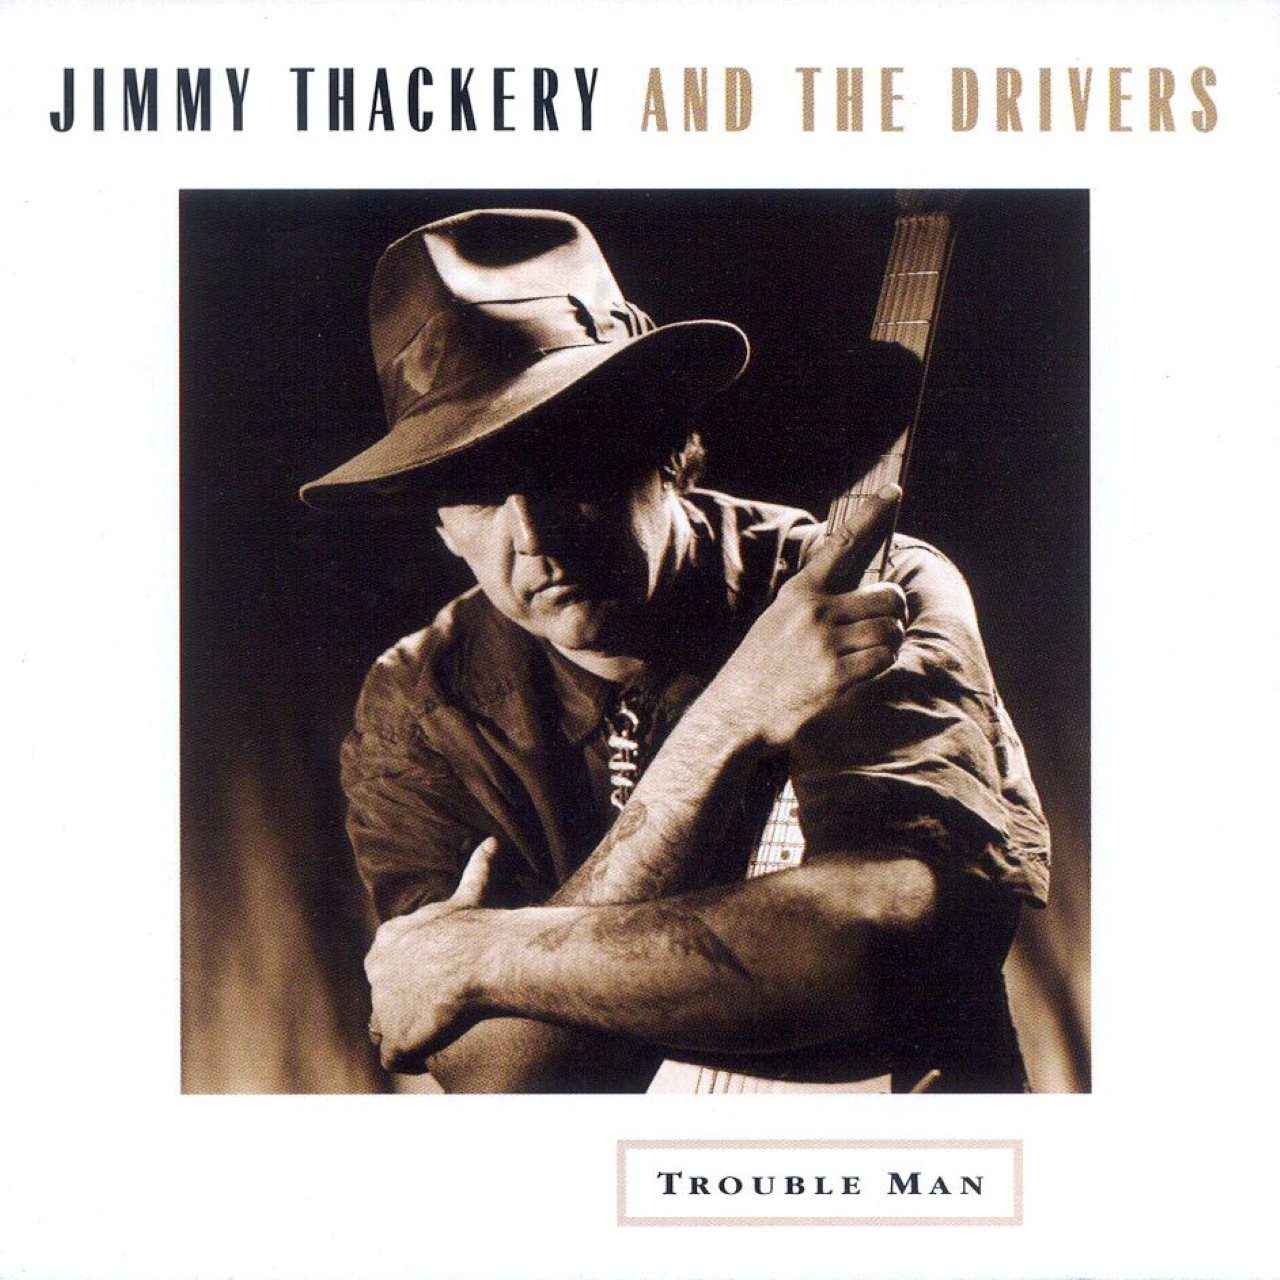 Jimmy Thackery And The Driver – Trouble Man cover album